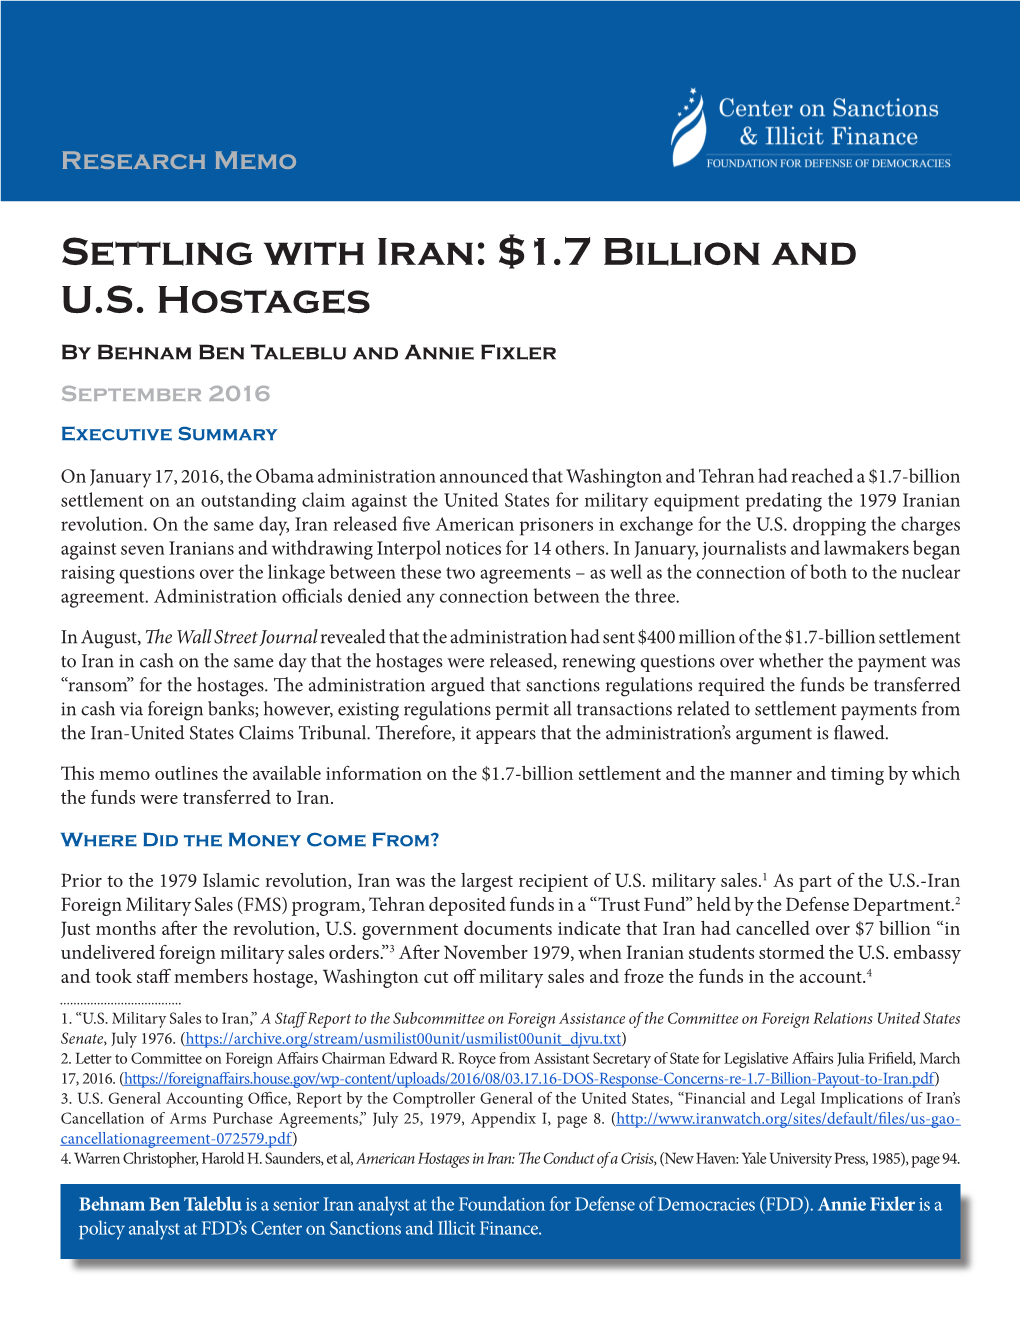 Settling with Iran: $1.7 Billion and US Hostages